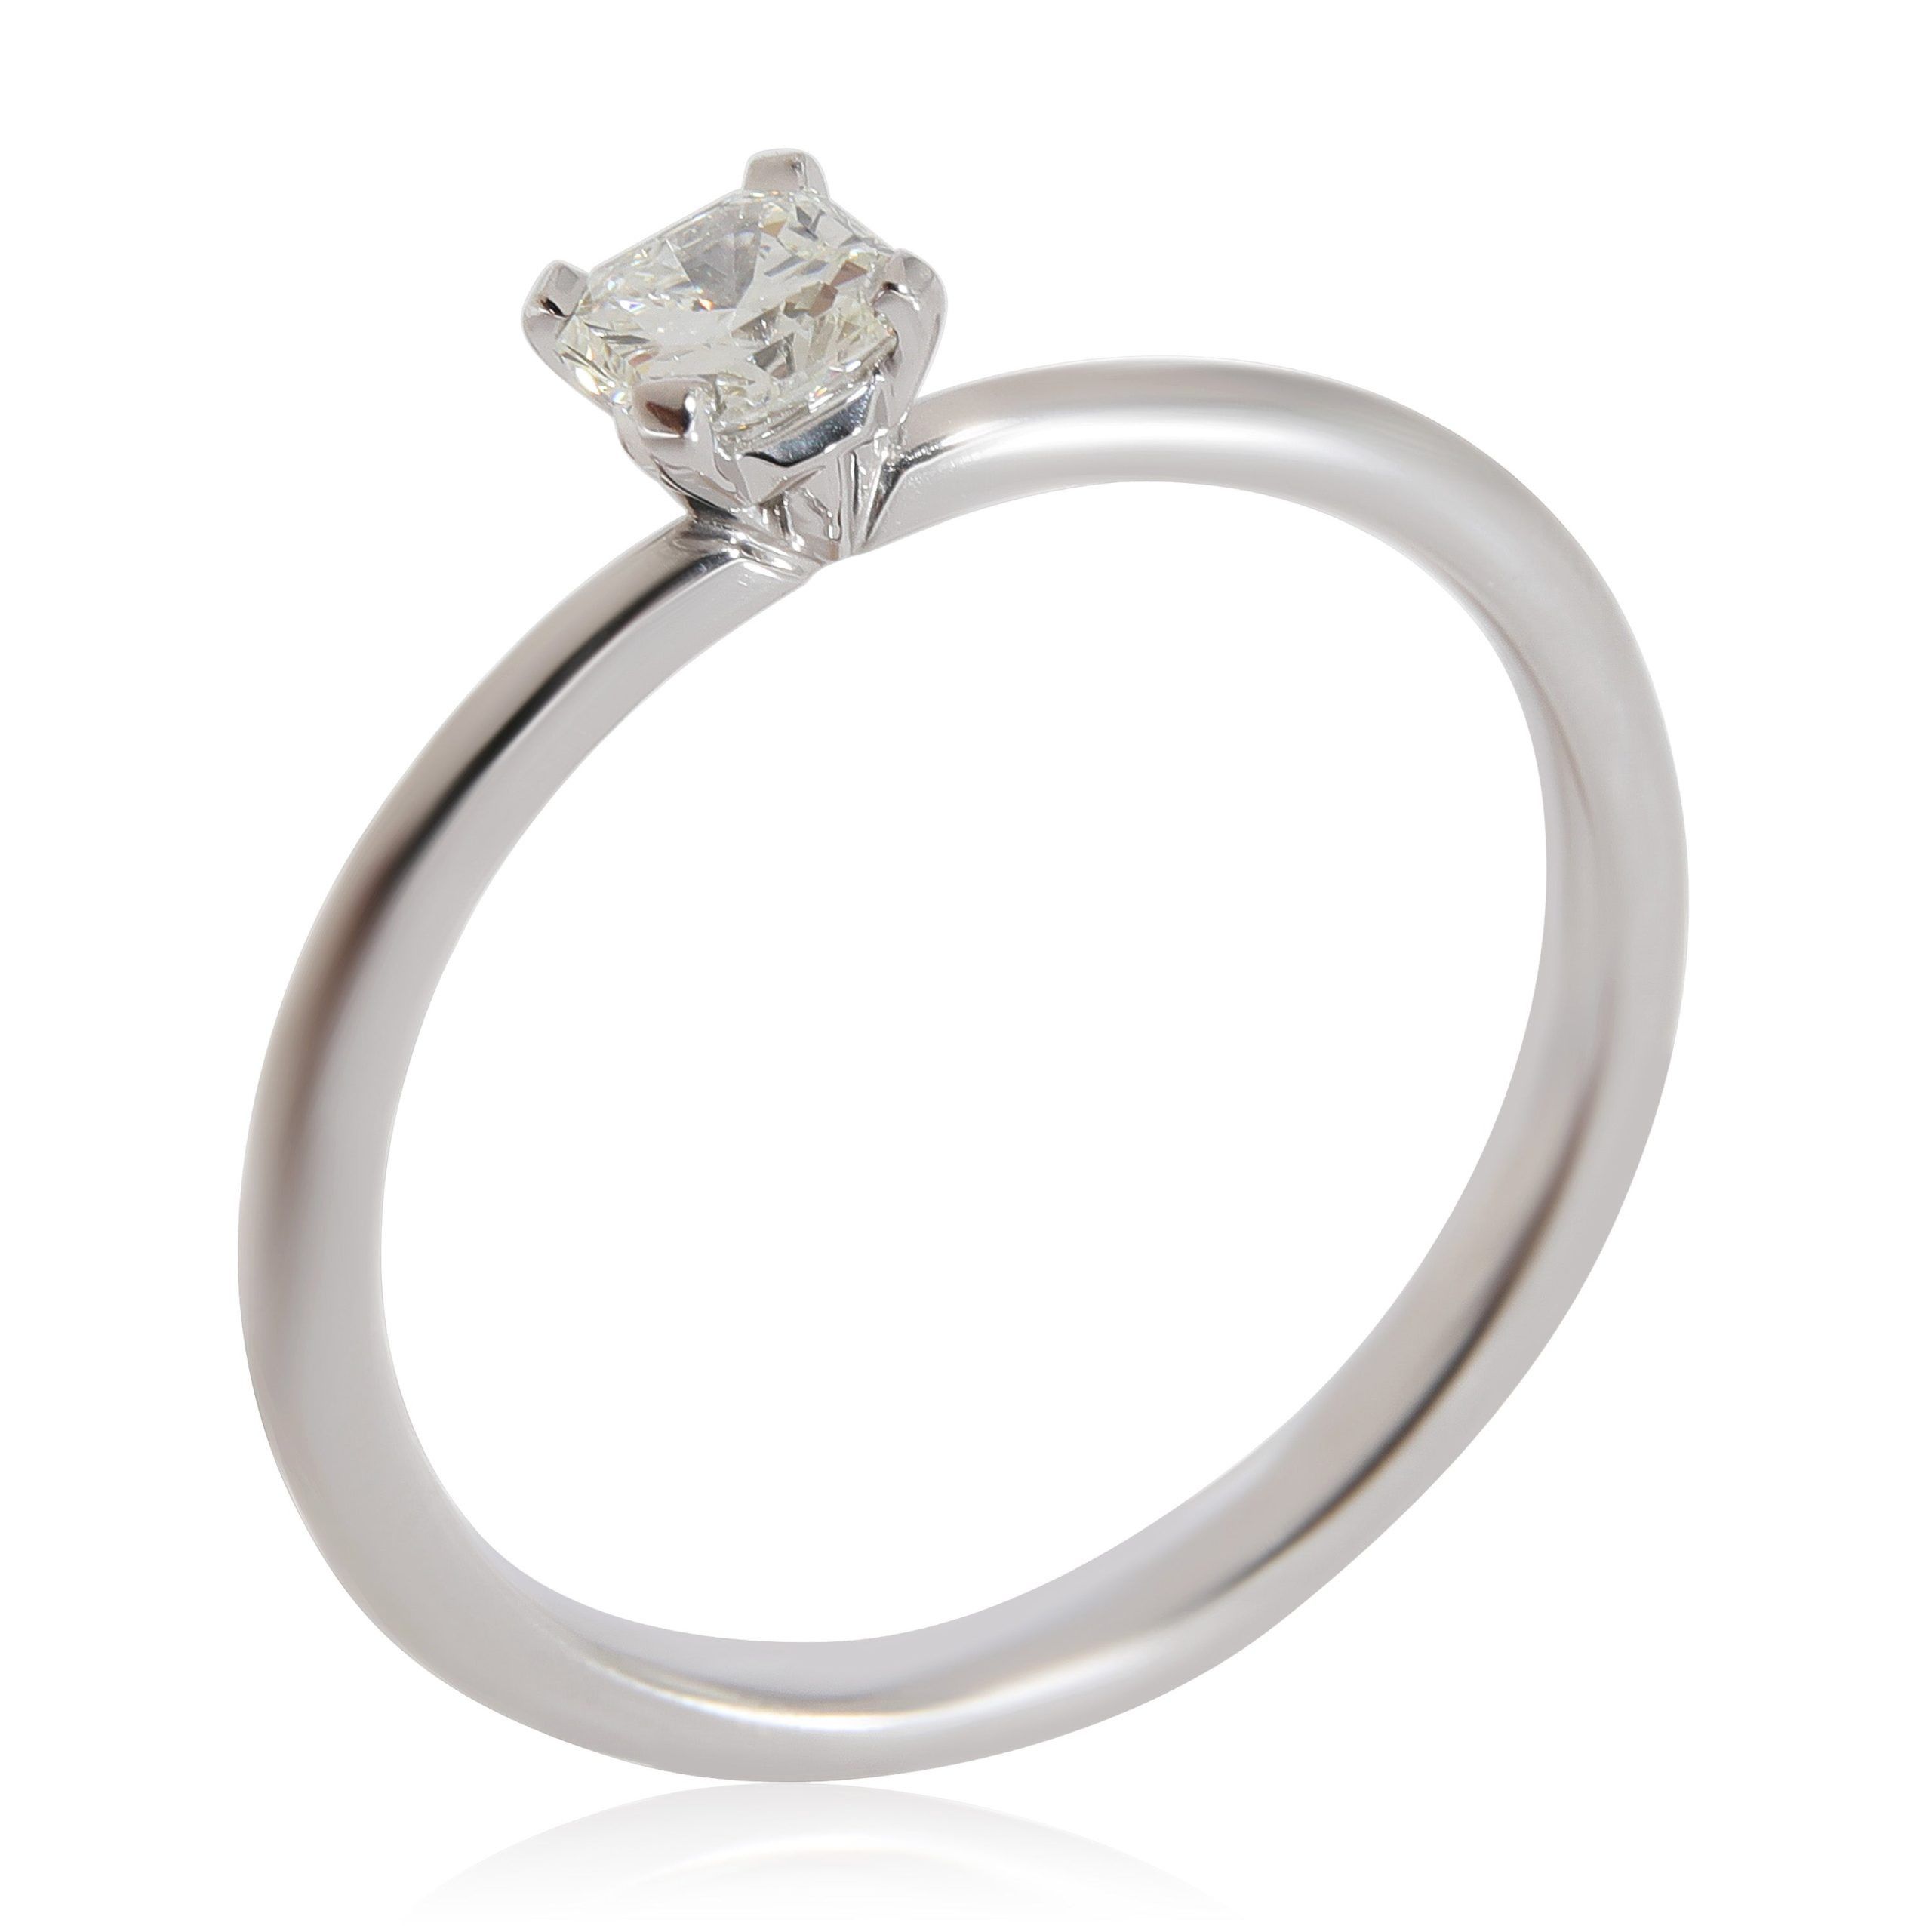 Tiffany & Co. Tiffany & Co. Diamond Solitaire Engagement Ring in Platinum I VS1 0.27 CTW Size ONE SIZE - 4 Thumbnail